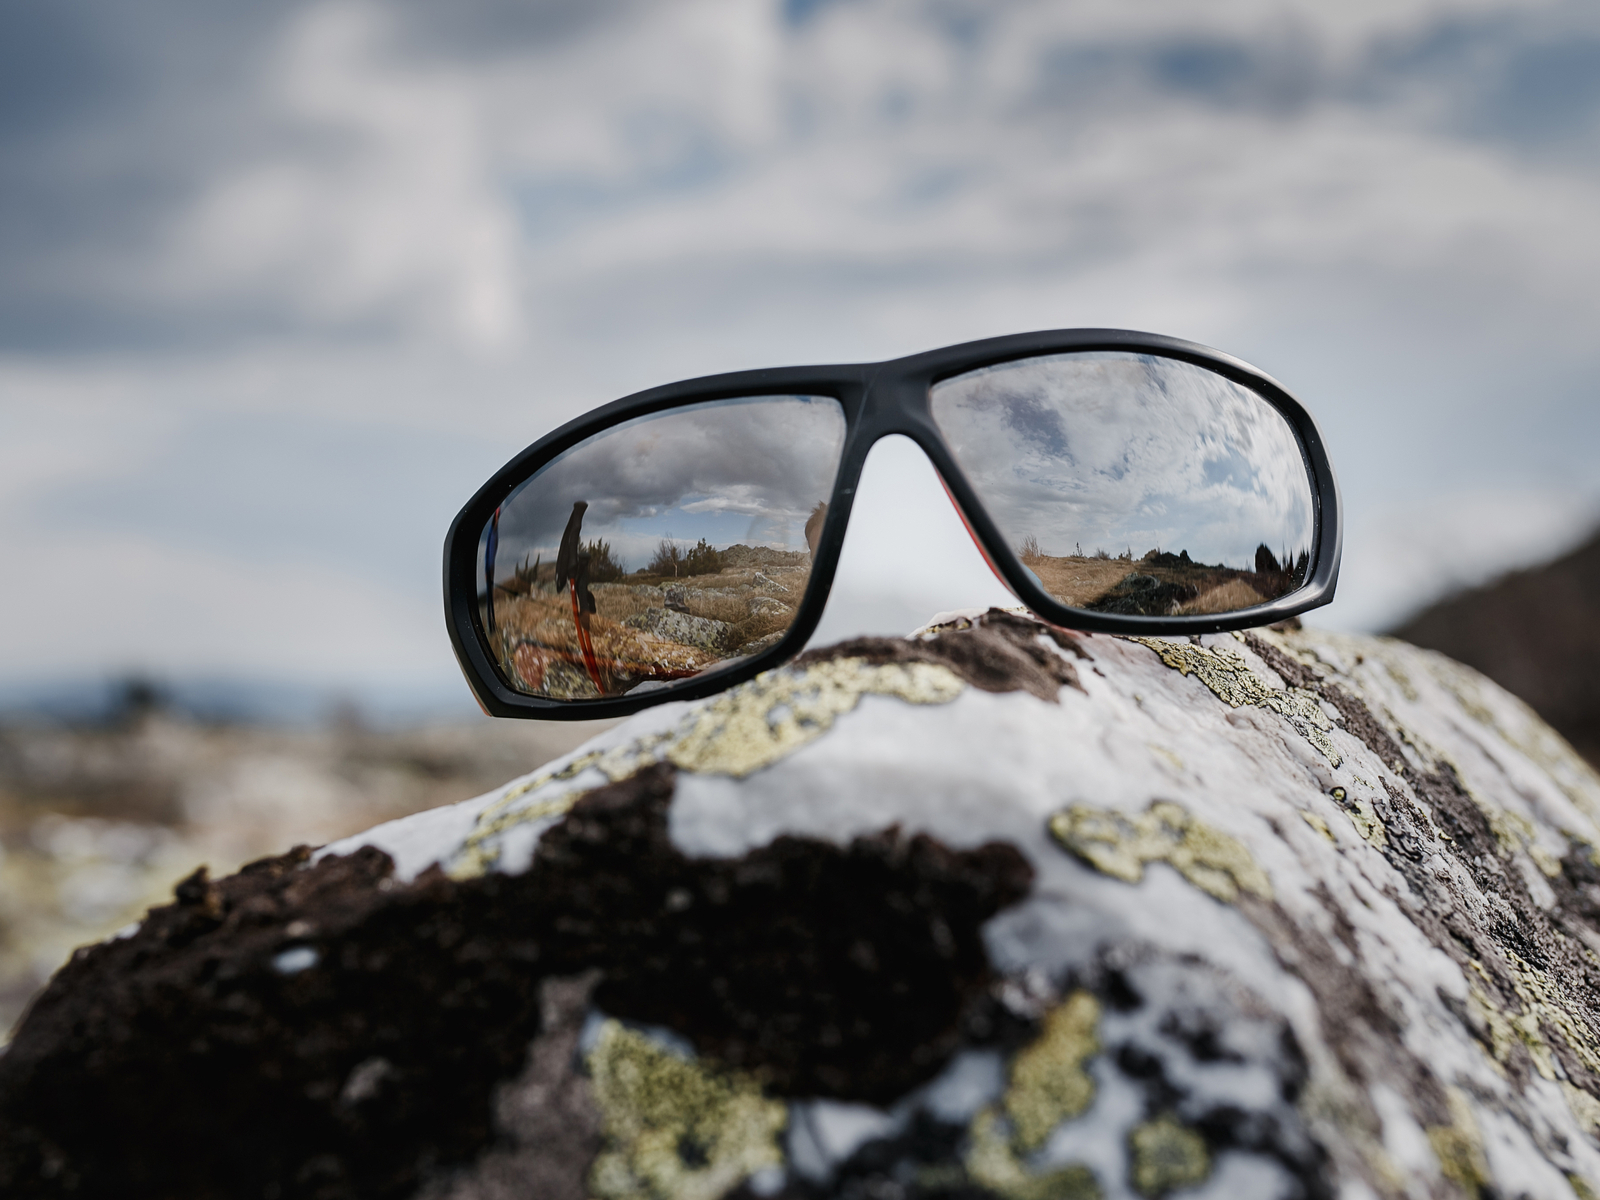 For a piece on the best hiking sunglasses, a pair of nice looking glasses sits in full-frame on a rock